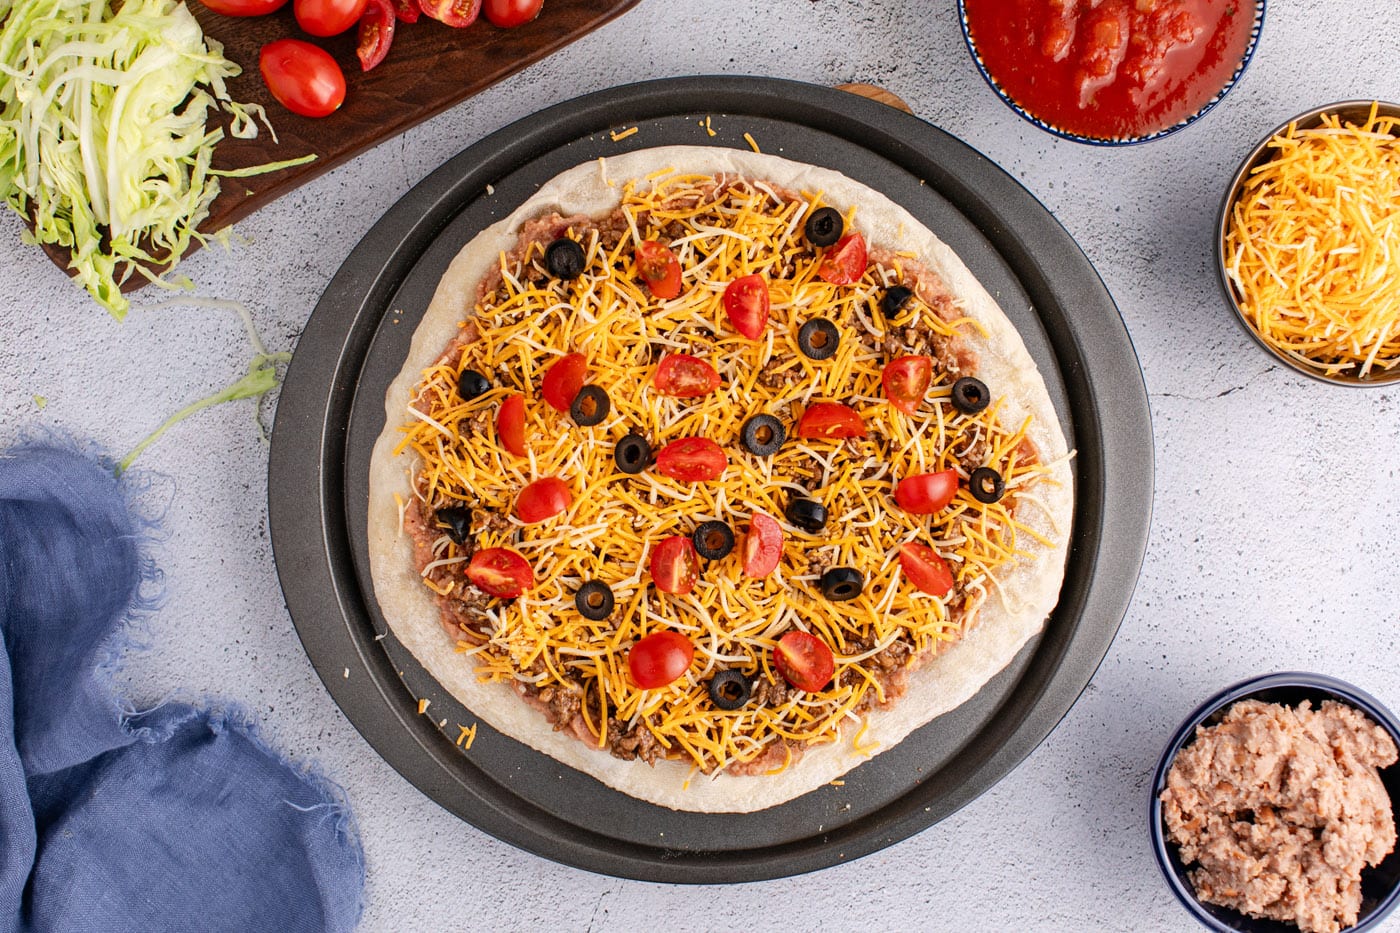 shredded cheese, taco meat, tomatoes, and olives added on top of refried beans and pizza crust